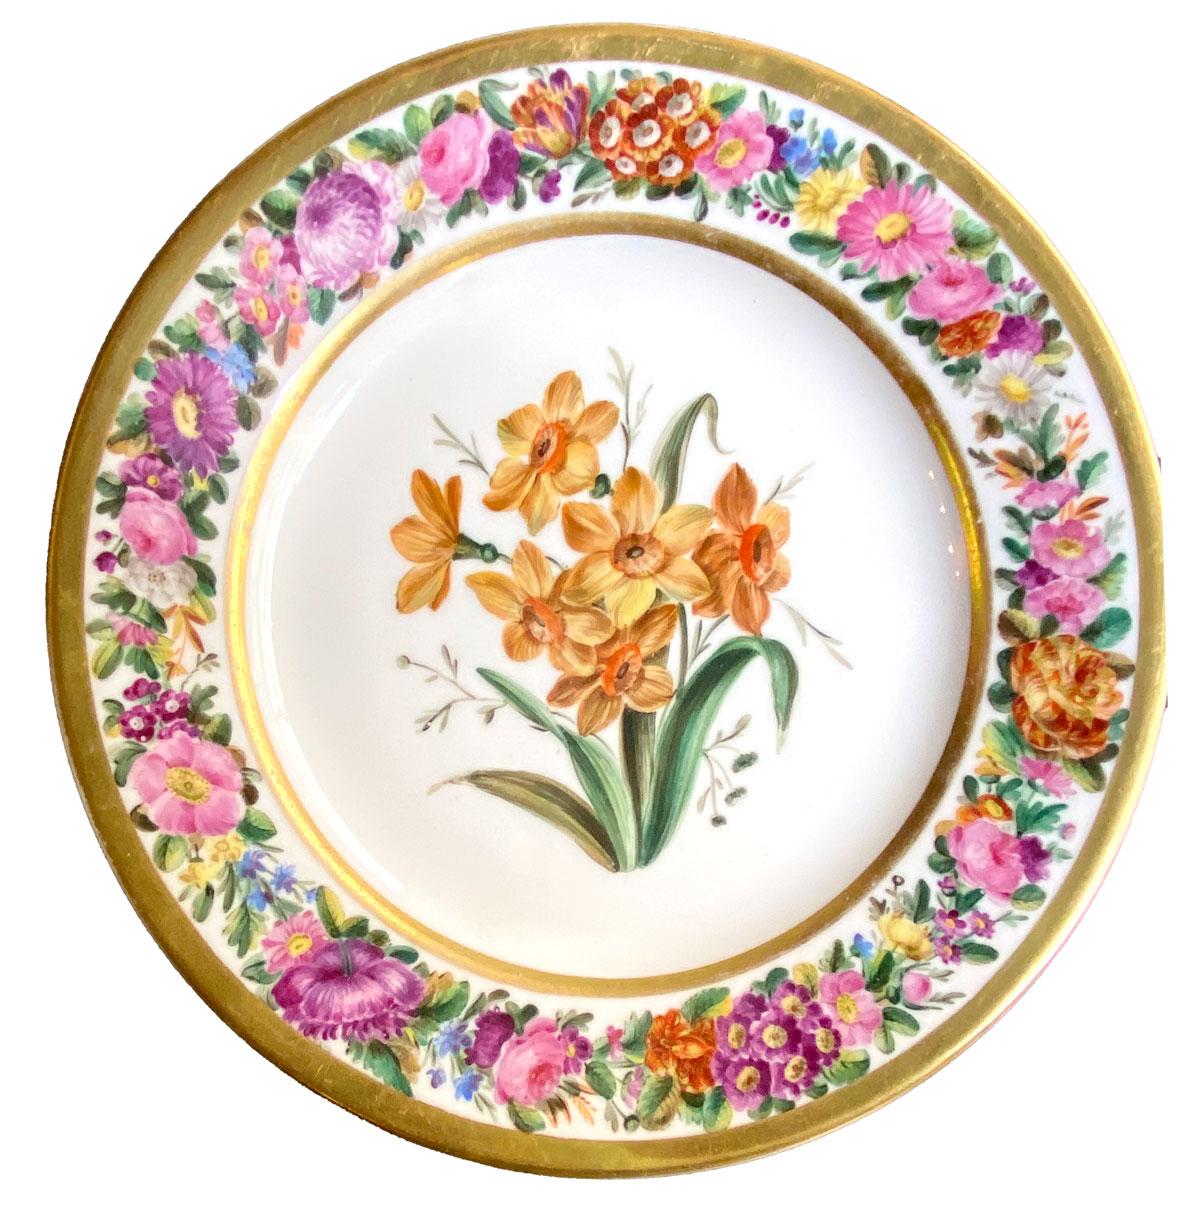 Set of 6 Early 19th Century Flower Plates by Denuelle - Vieux Paris  1